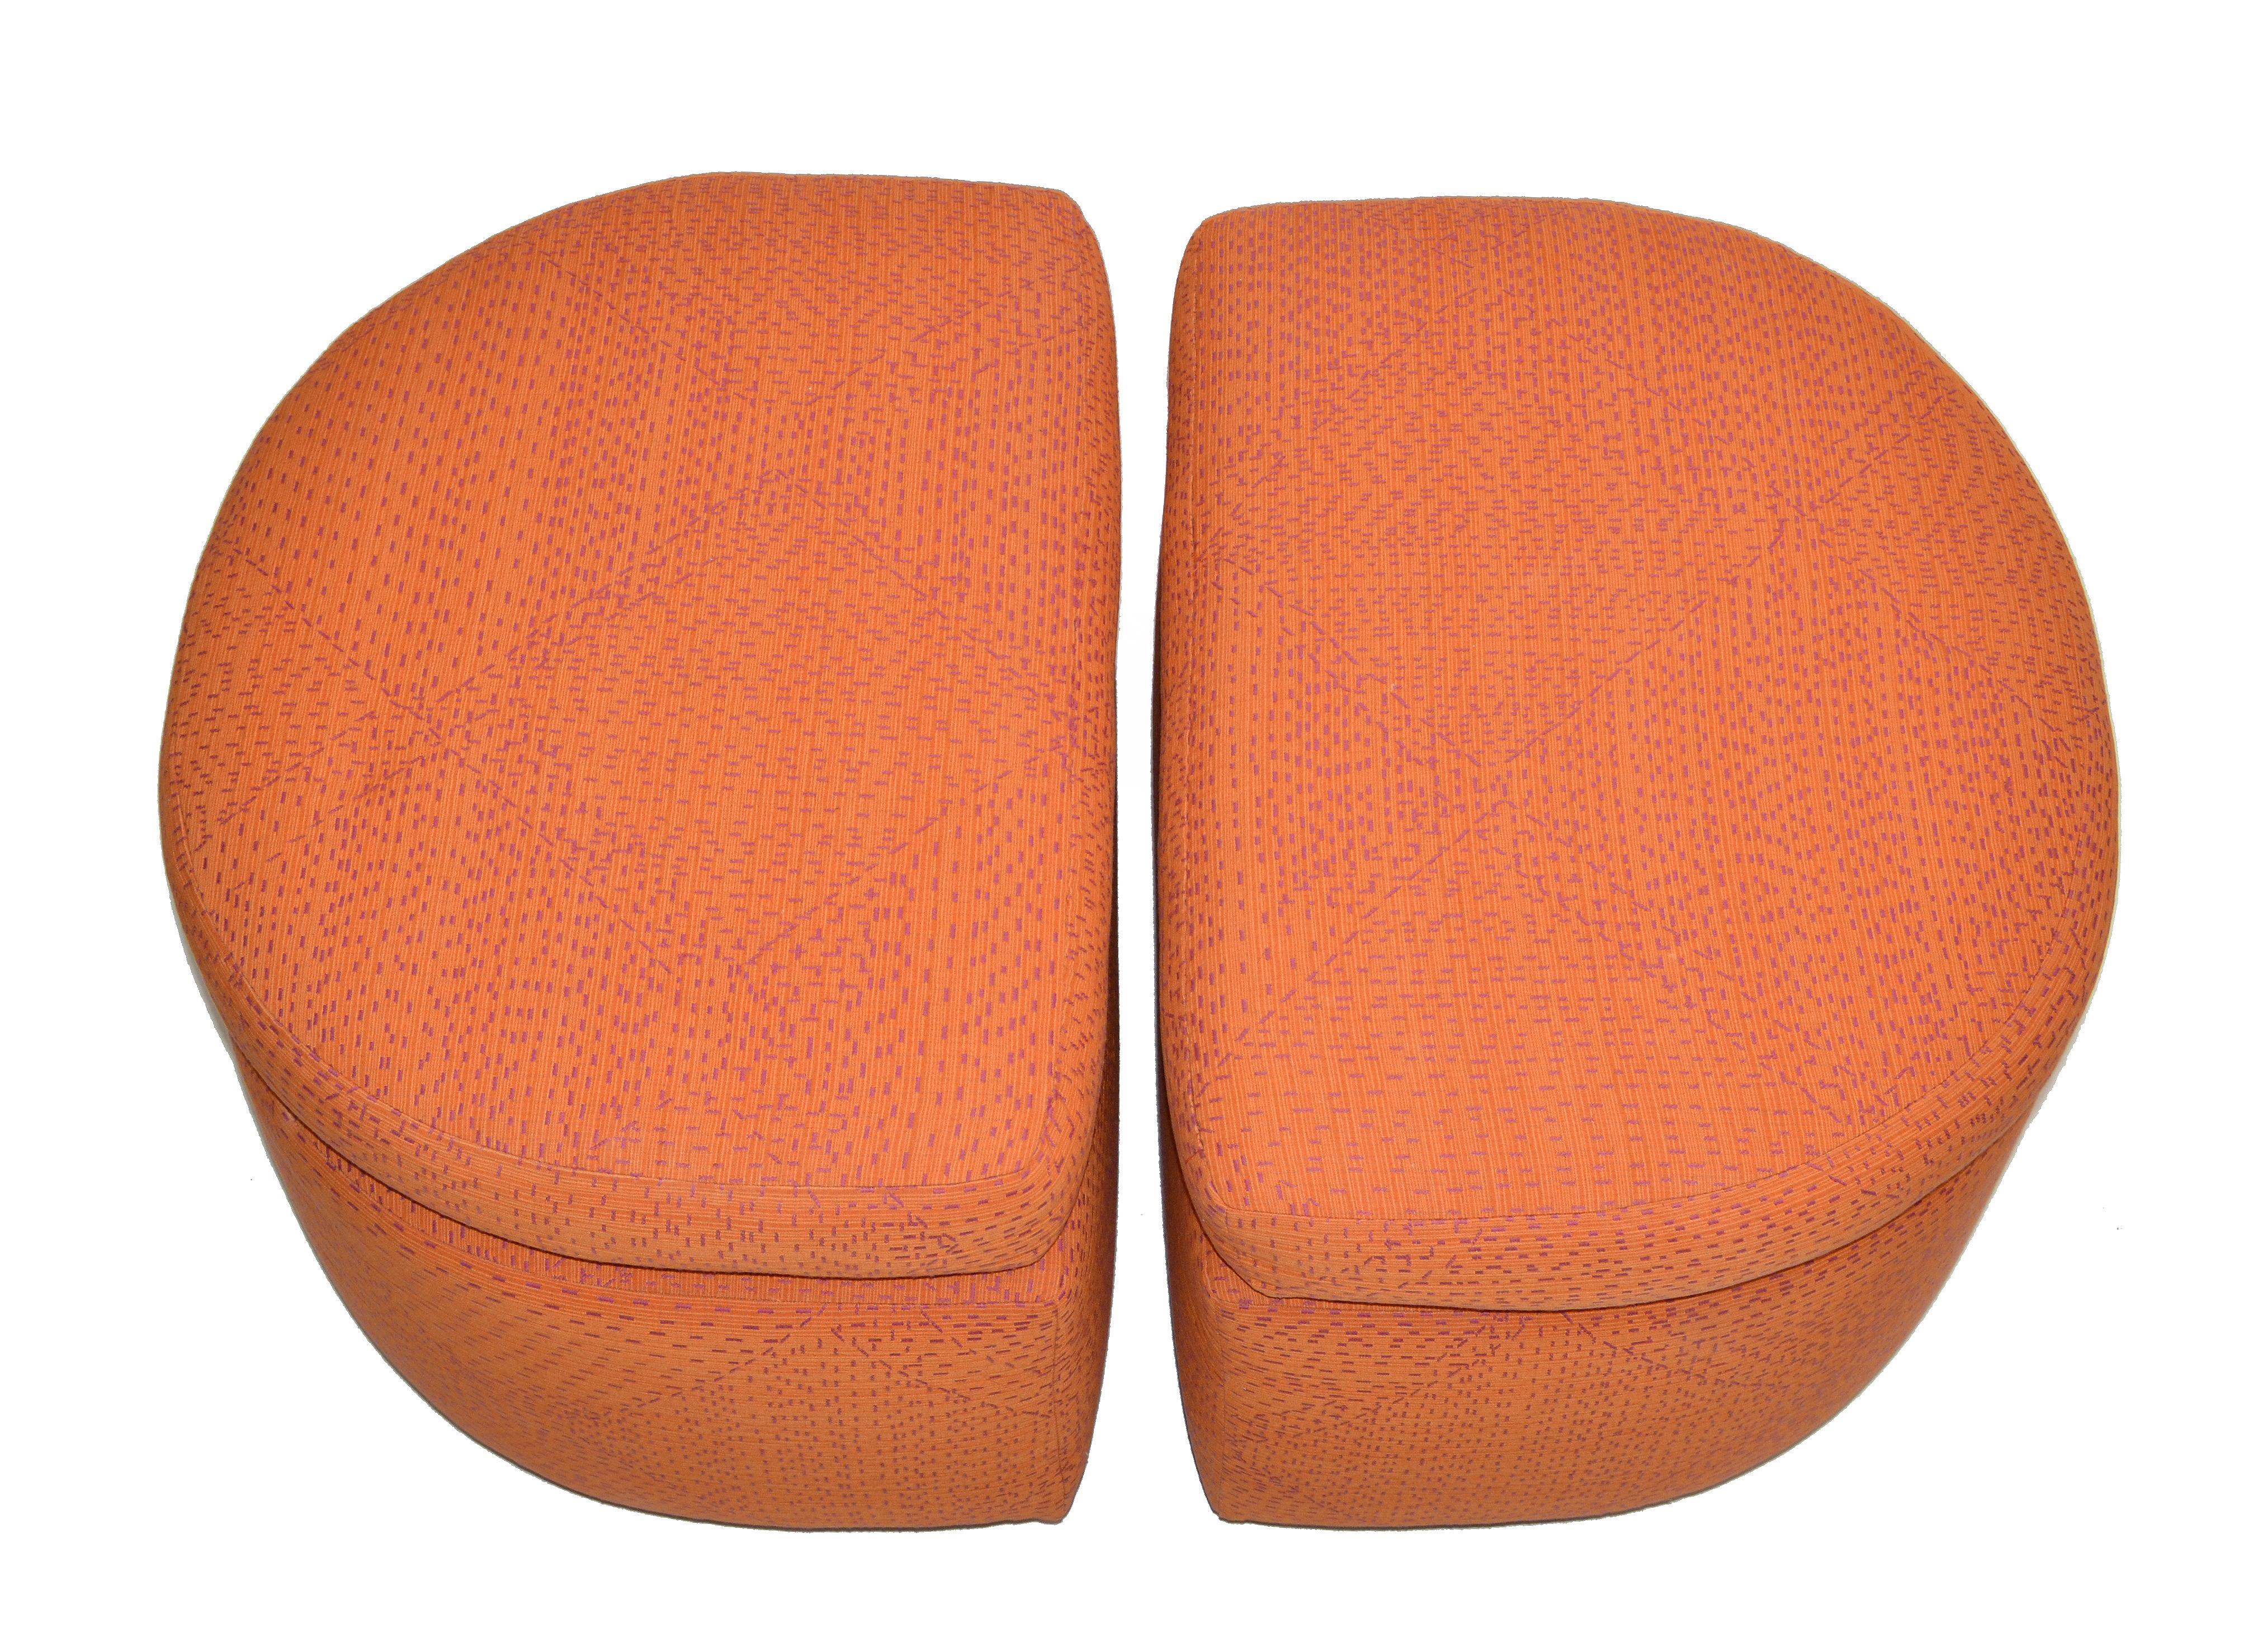 Pair of unique shaped ottoman in orange and purple cotton fabric on casters.
Each ottoman has a seat cushion and the four casters work smoothly.
 